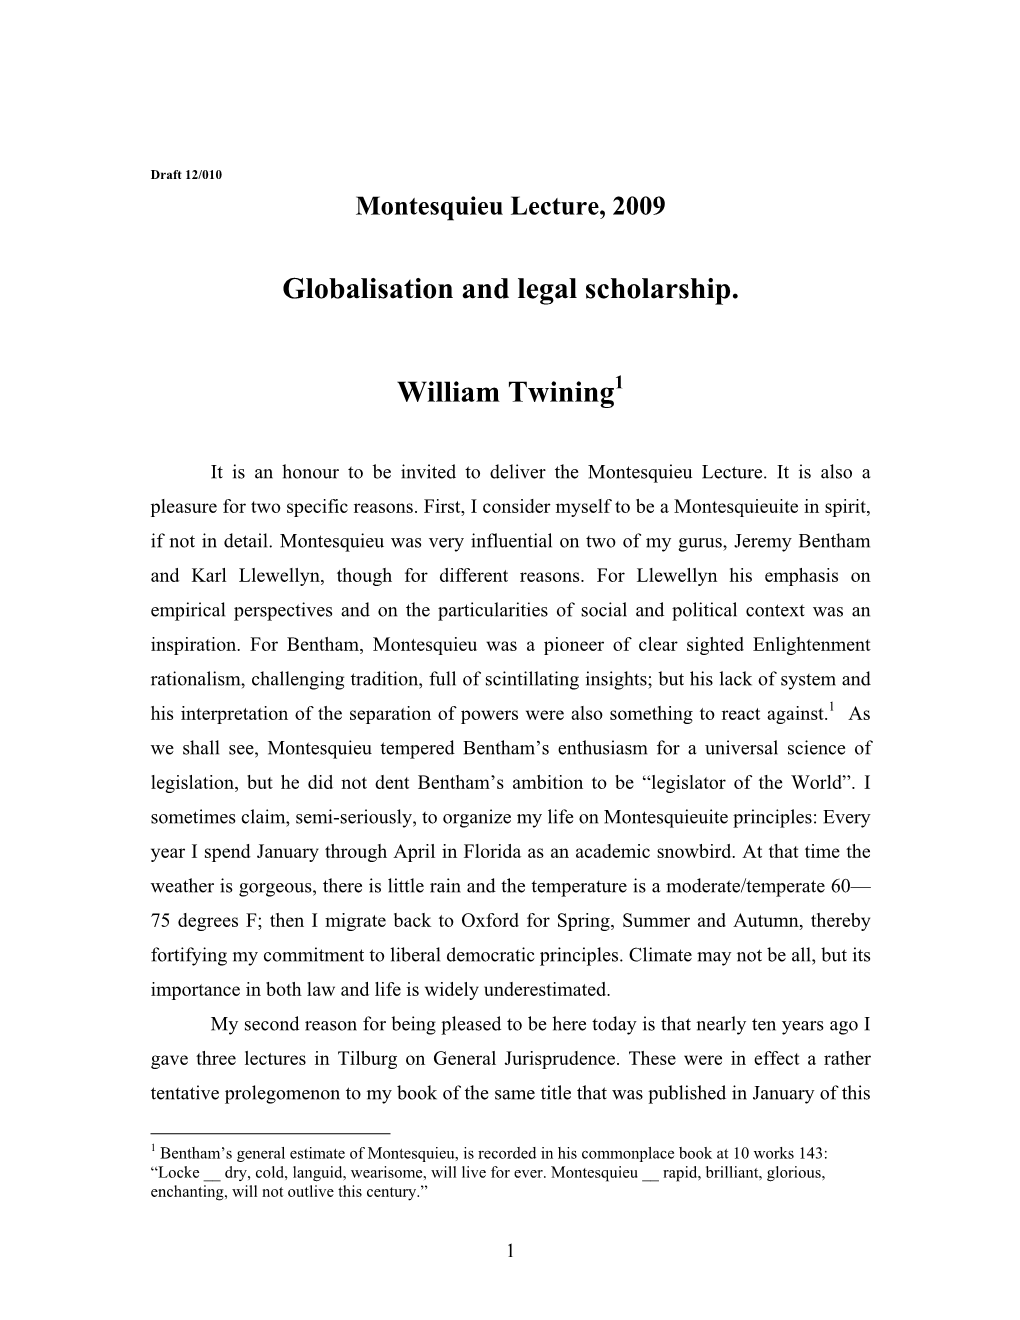 Globalisation and Legal Scholarship. William Twining